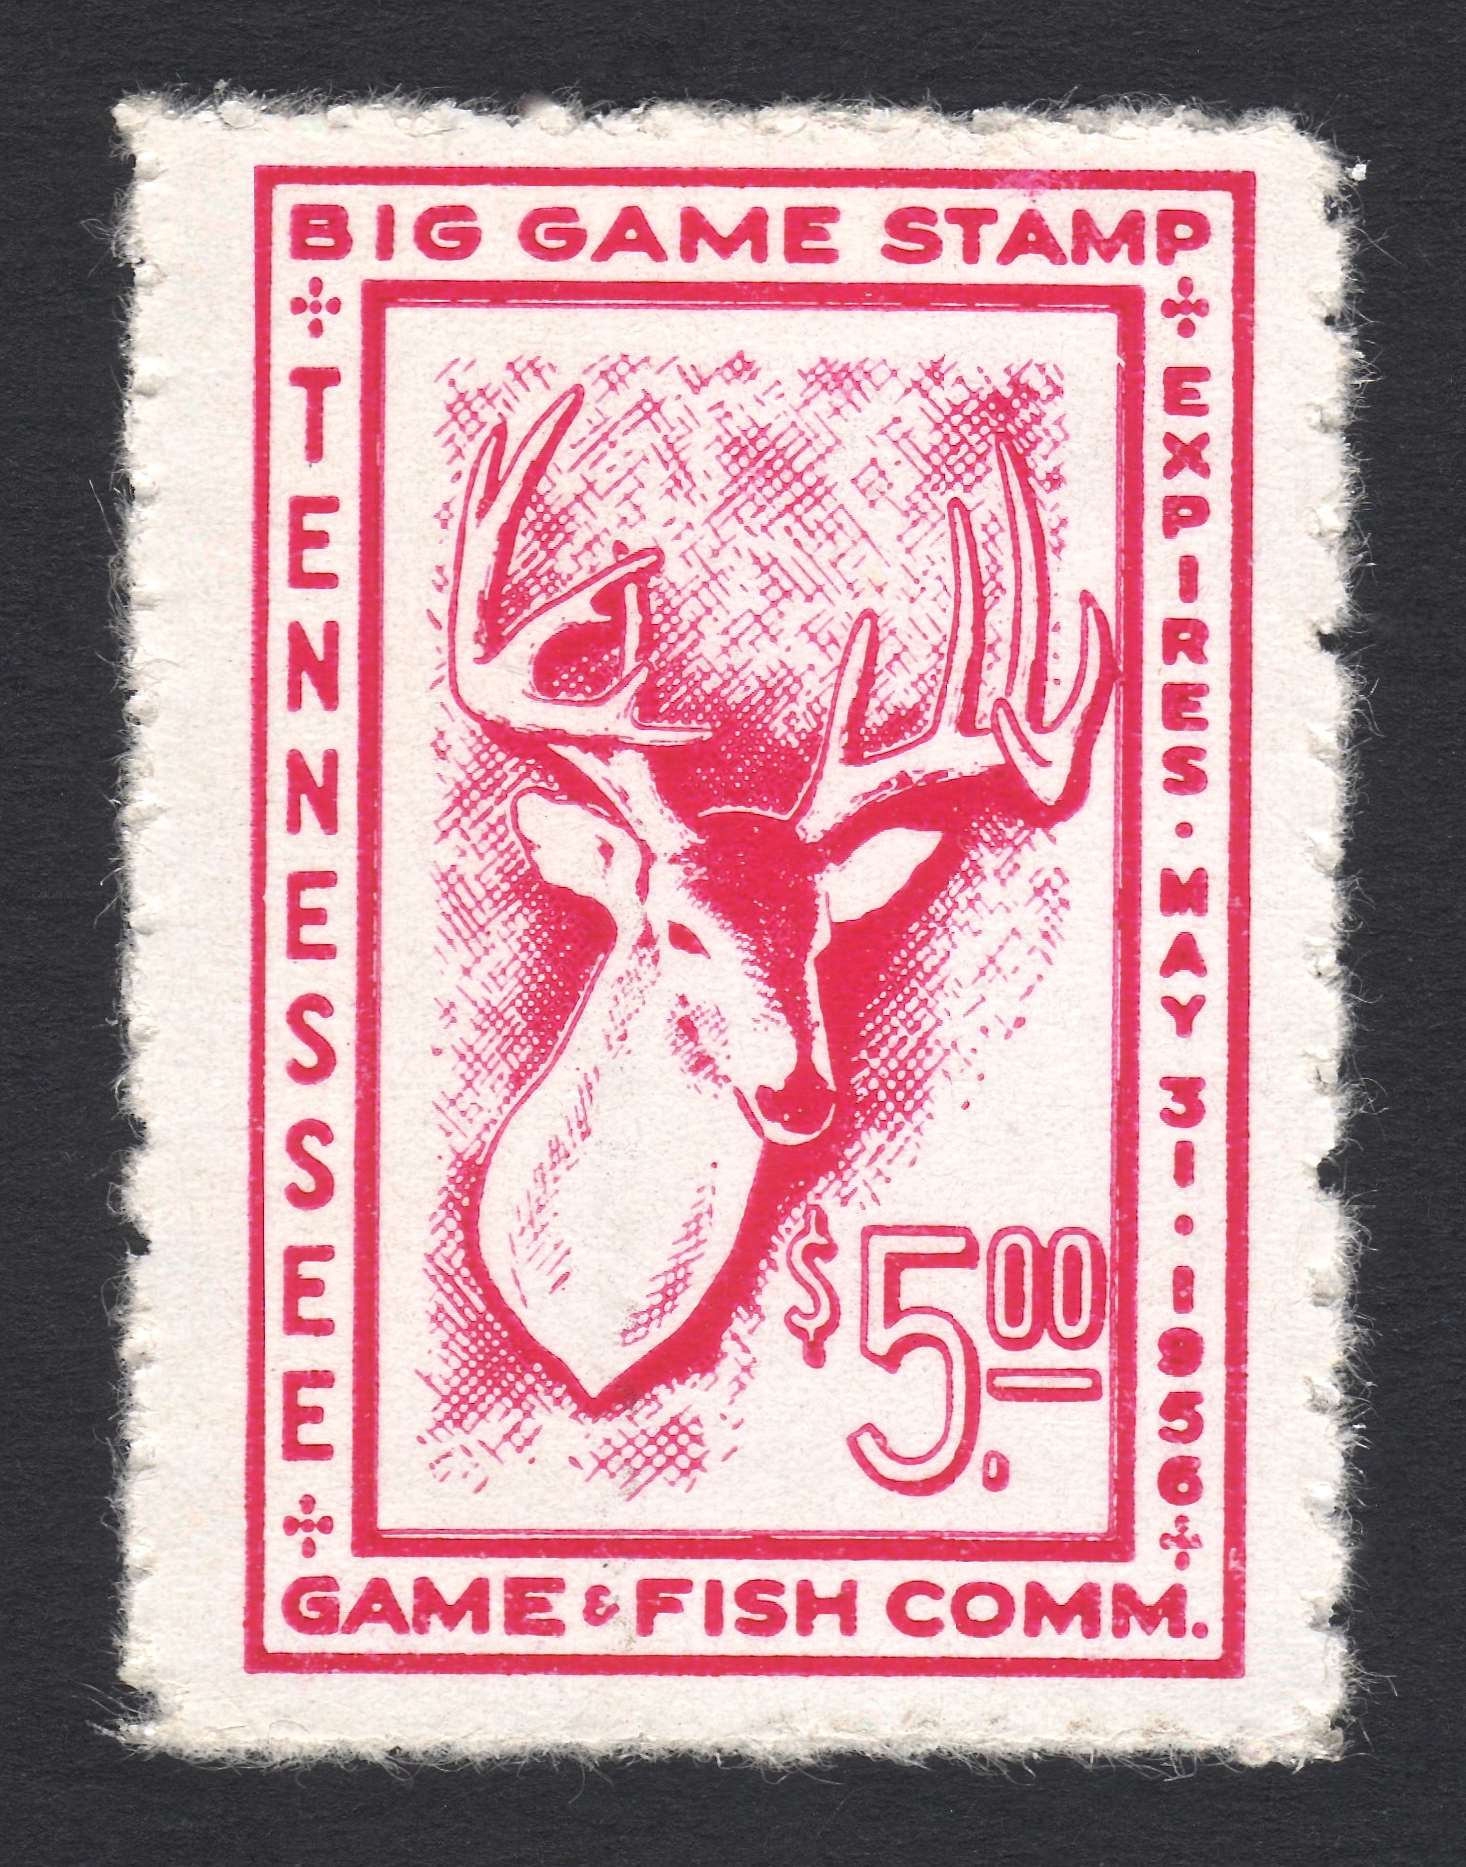 1955-56 Tennessee Big Game with Crude Perforations, ex Carnahan Archive